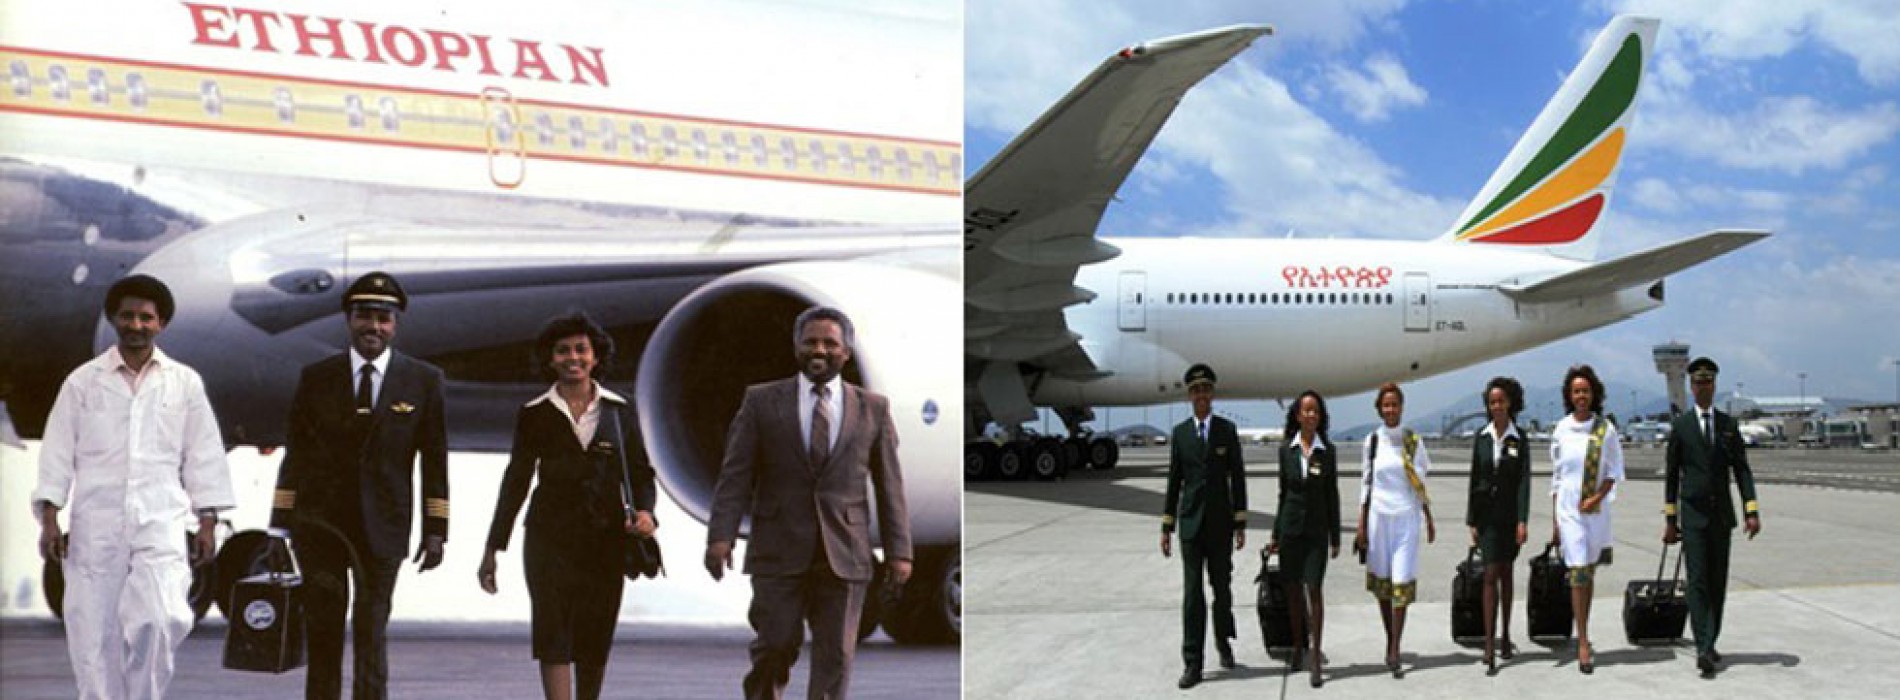 Ethiopian Airlines celebrates its 70 years in air transport services